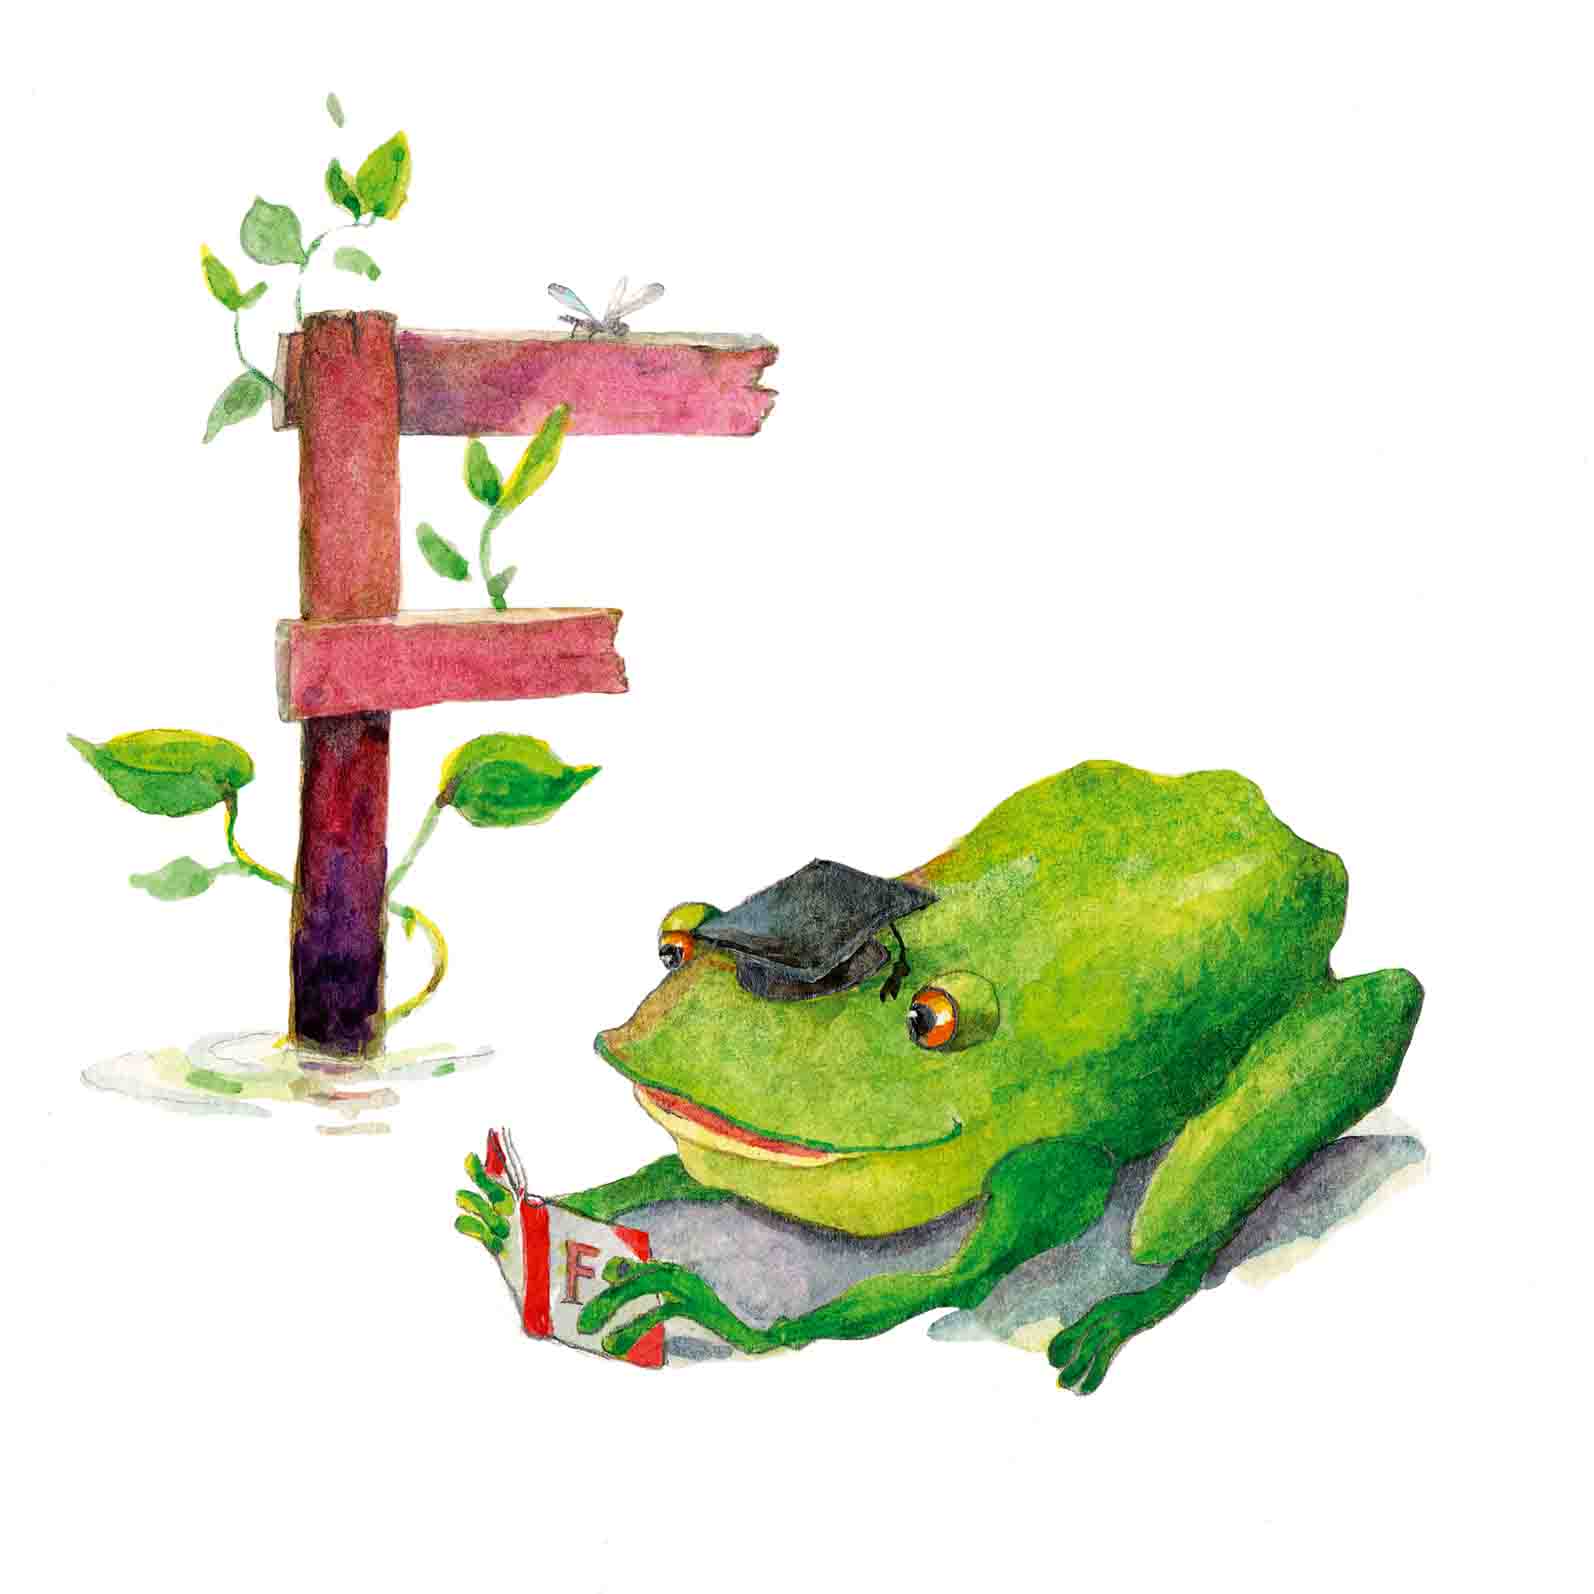 F for Frog